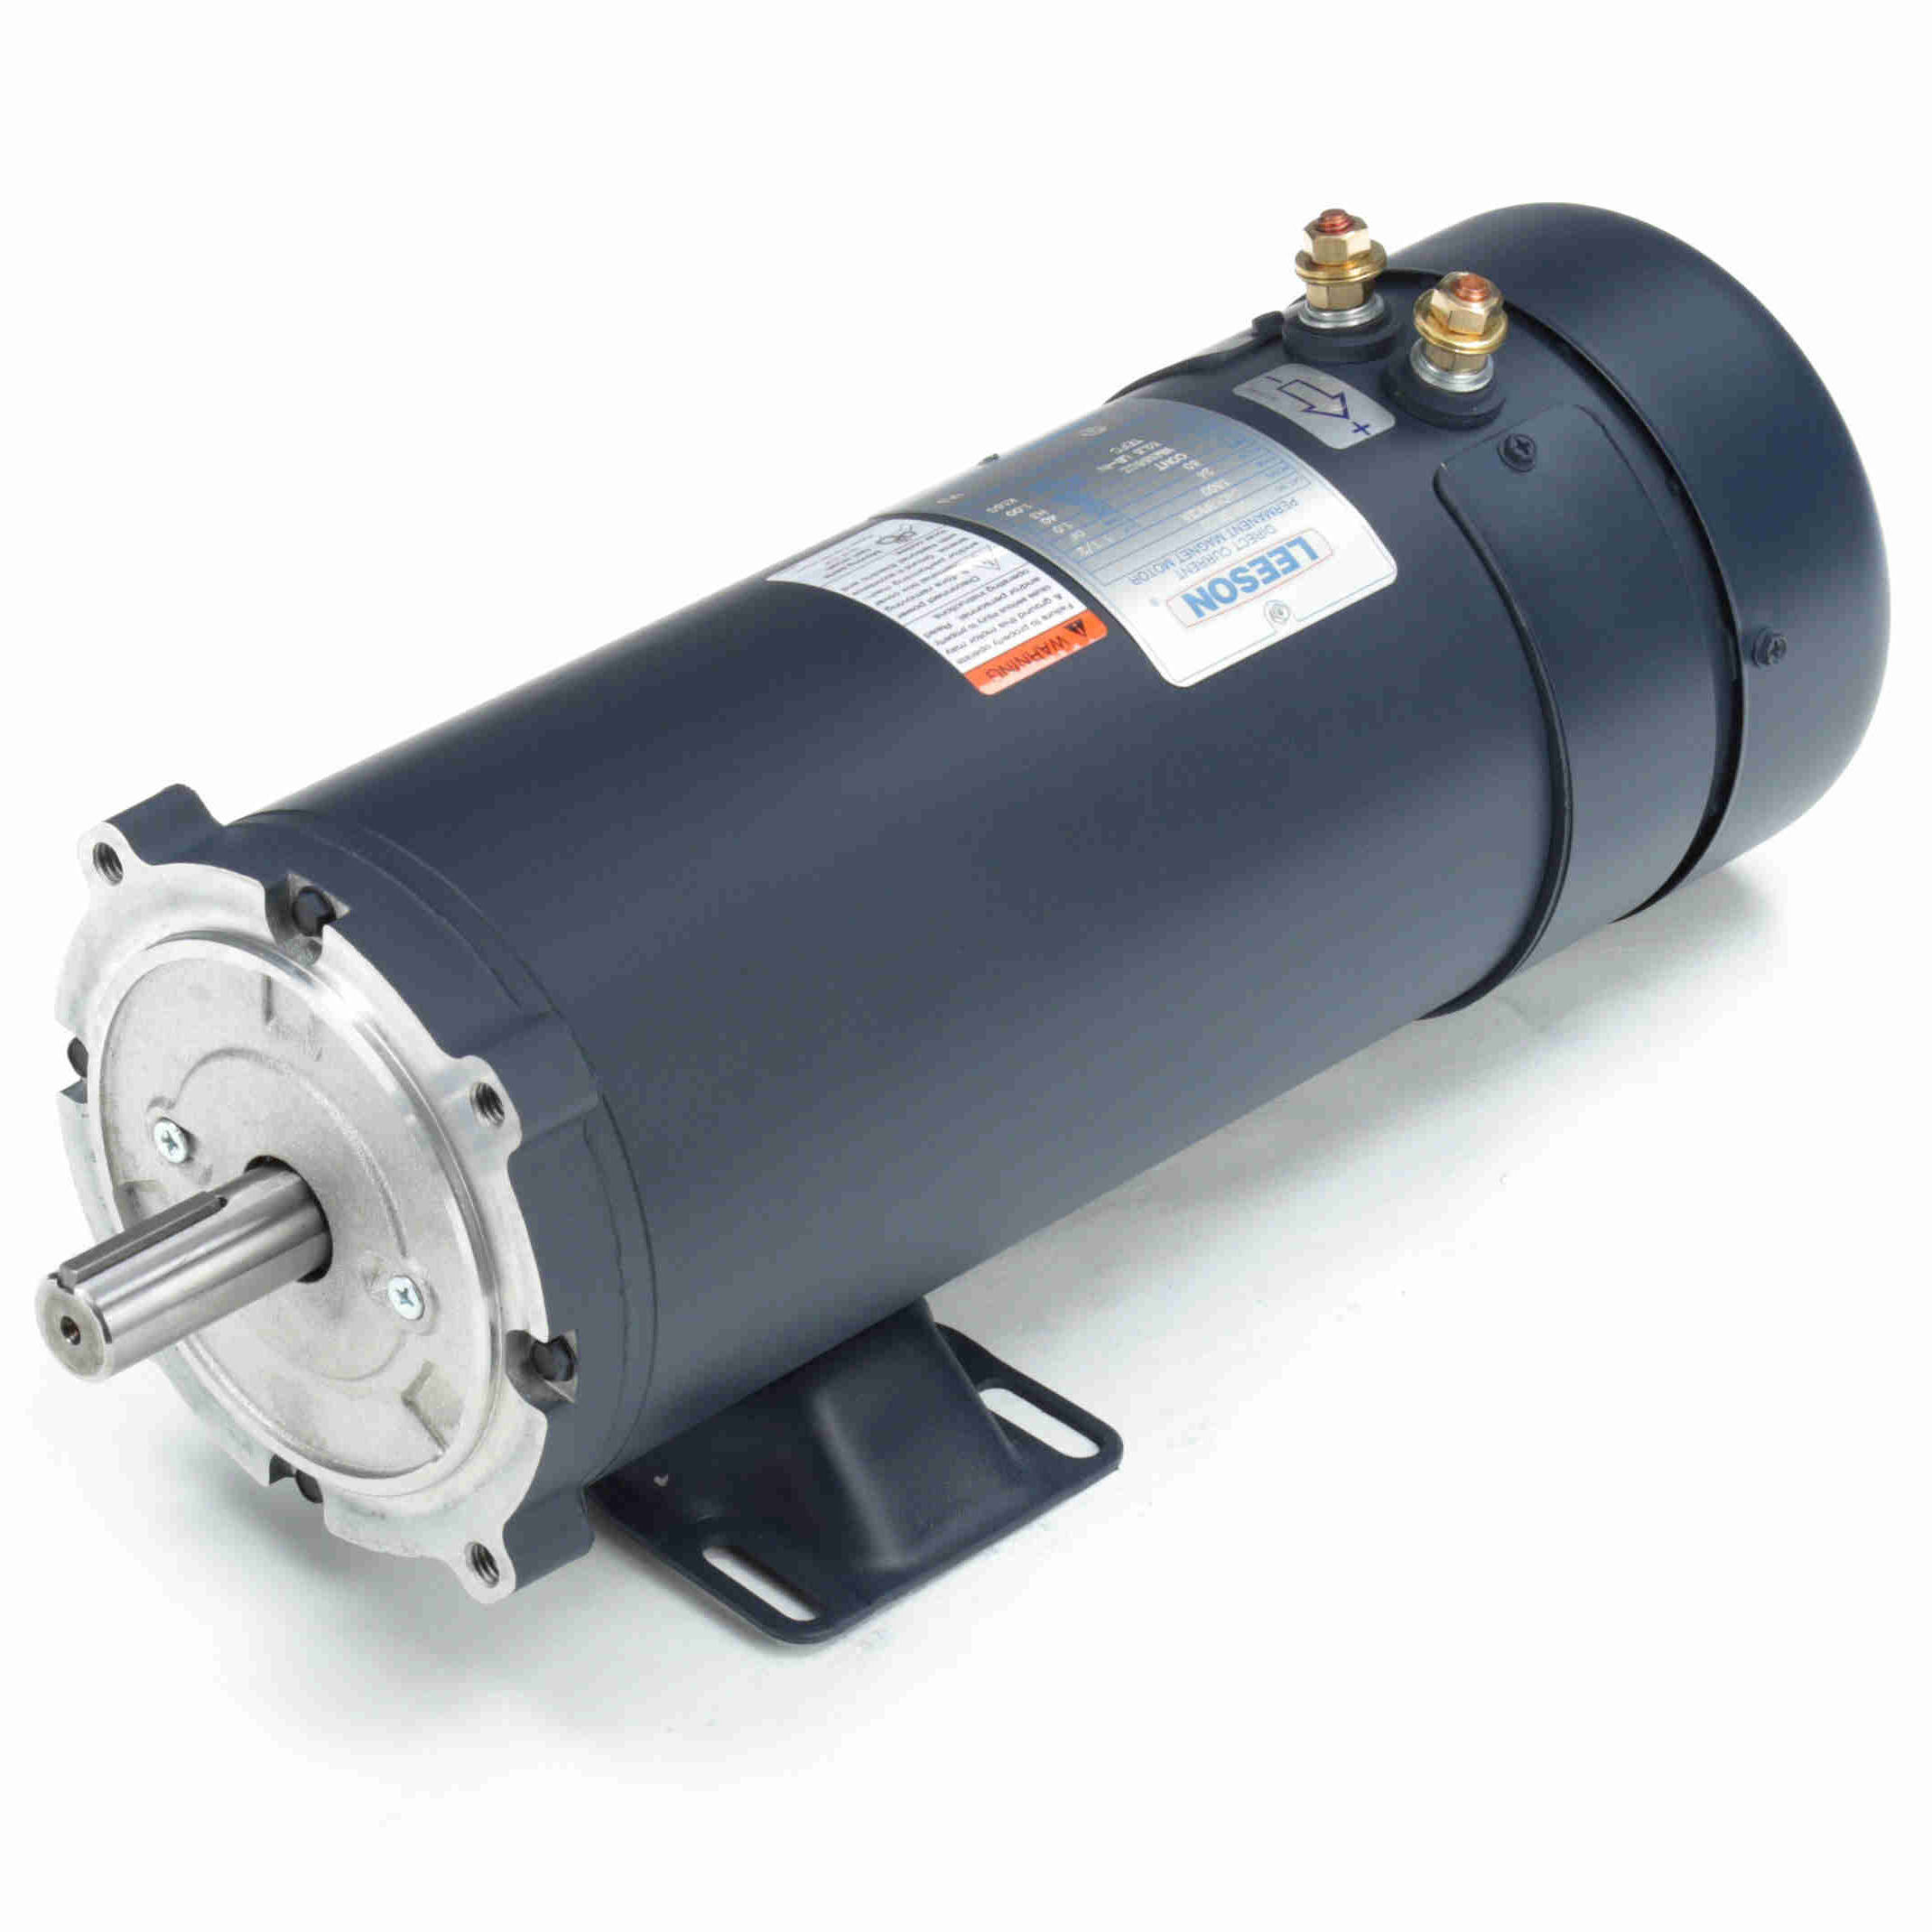 109103.00 Leeson 1.5HP Low Voltage DC Electric Motor, 1800RPM 2